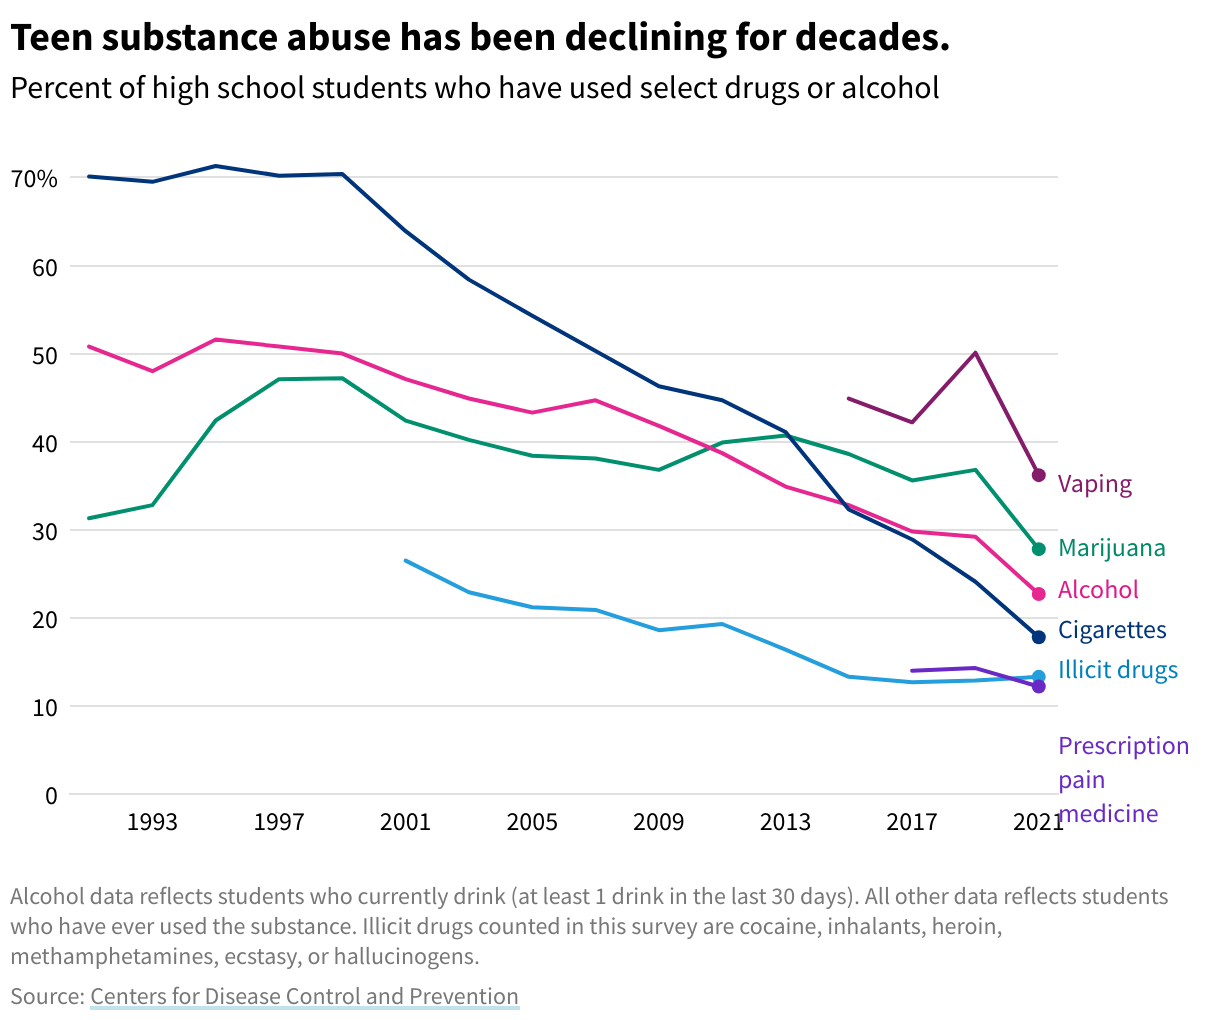 Line chart showing teen substance abuse from 1991 to 2021, with a general downward trend for all drugs and alcohol included in the survey.